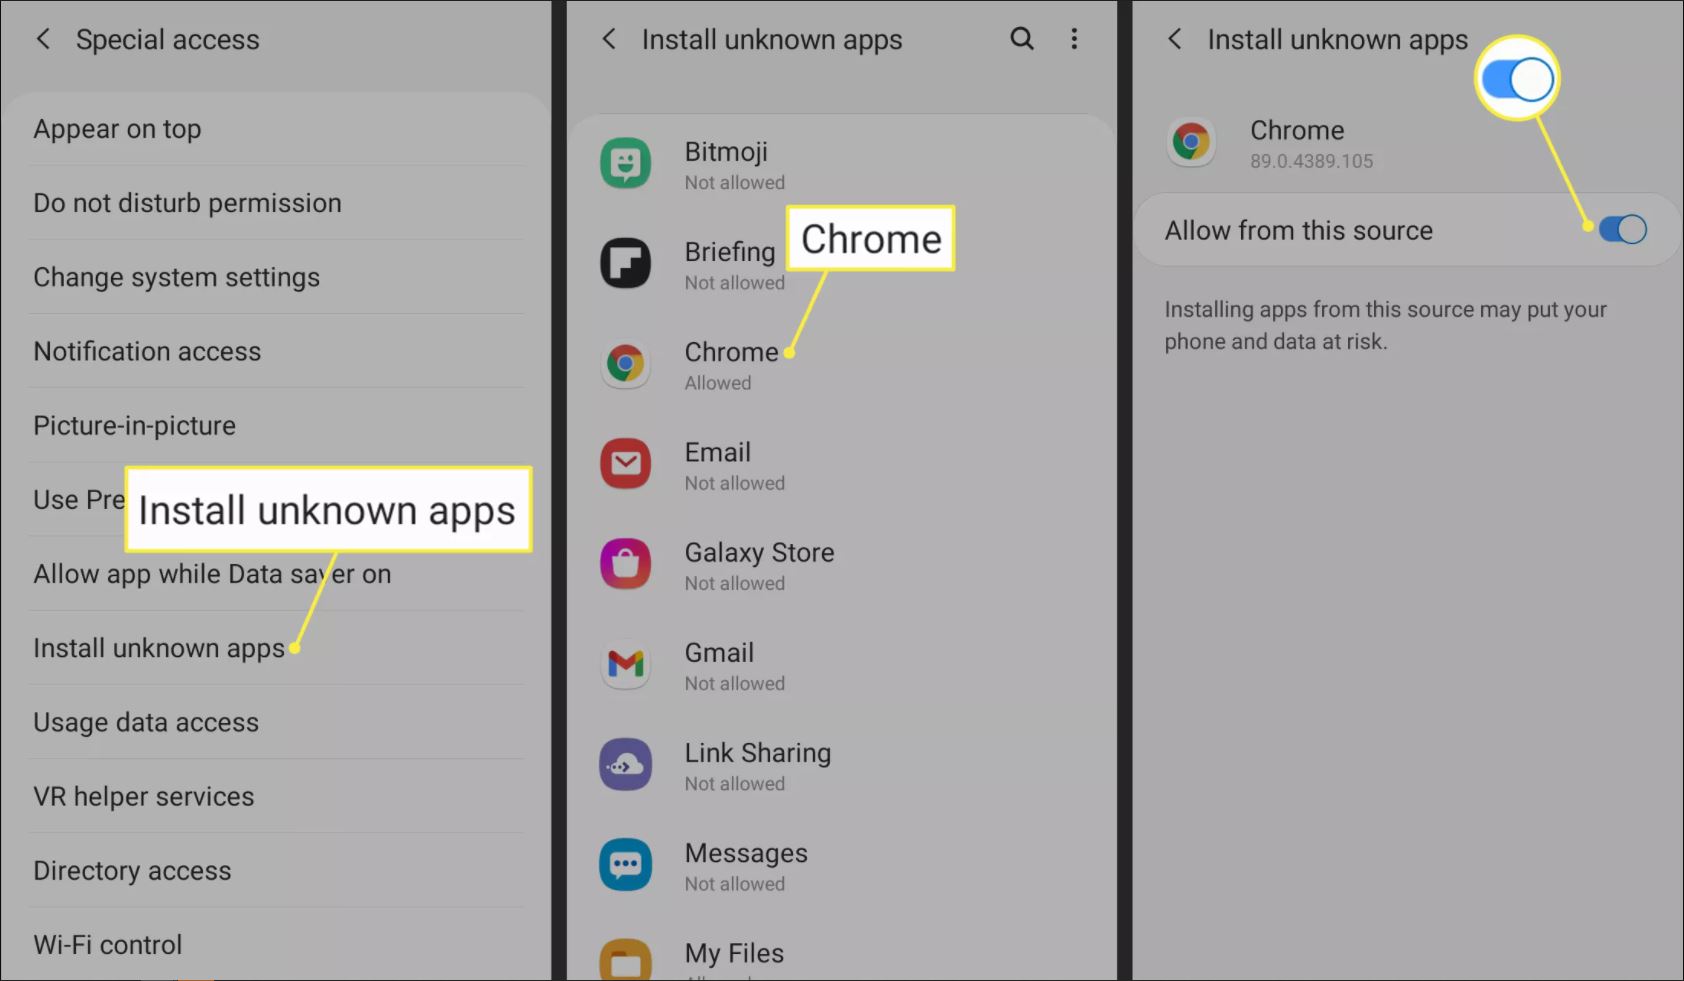 Install unknown apps, Chrome, and Allow from this source toggle in Android settings